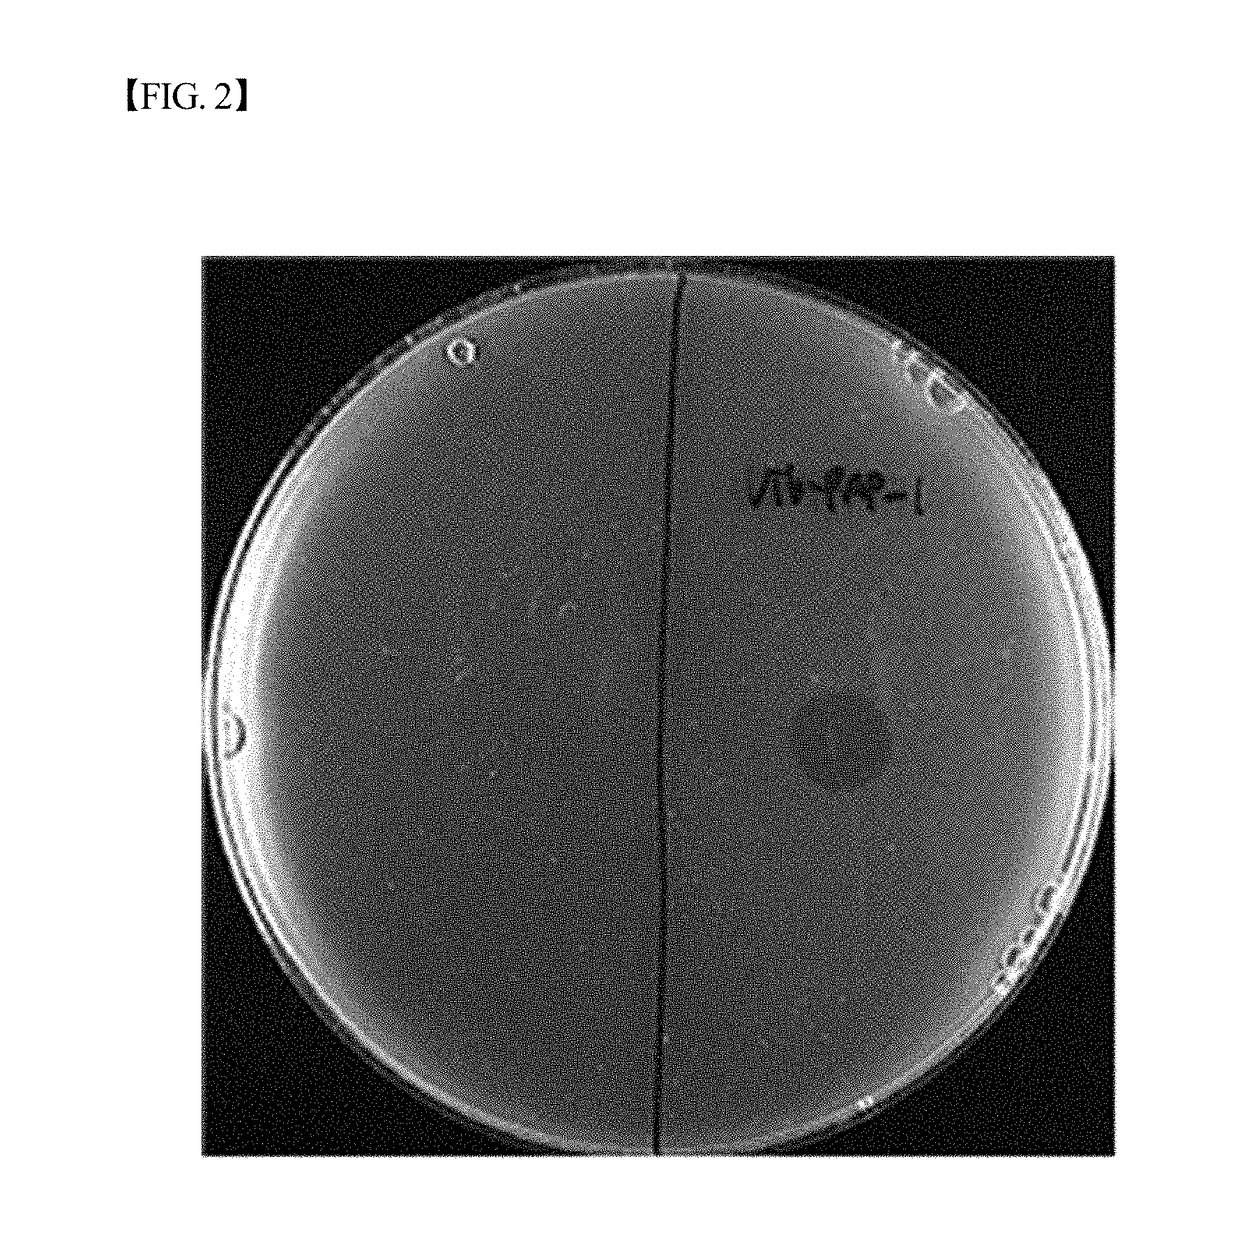 Novel vibrio parahaemolyticus bacteriophage vib-pap-1 and use thereof for inhibiting proliferation of vibrio parahaemolyticus